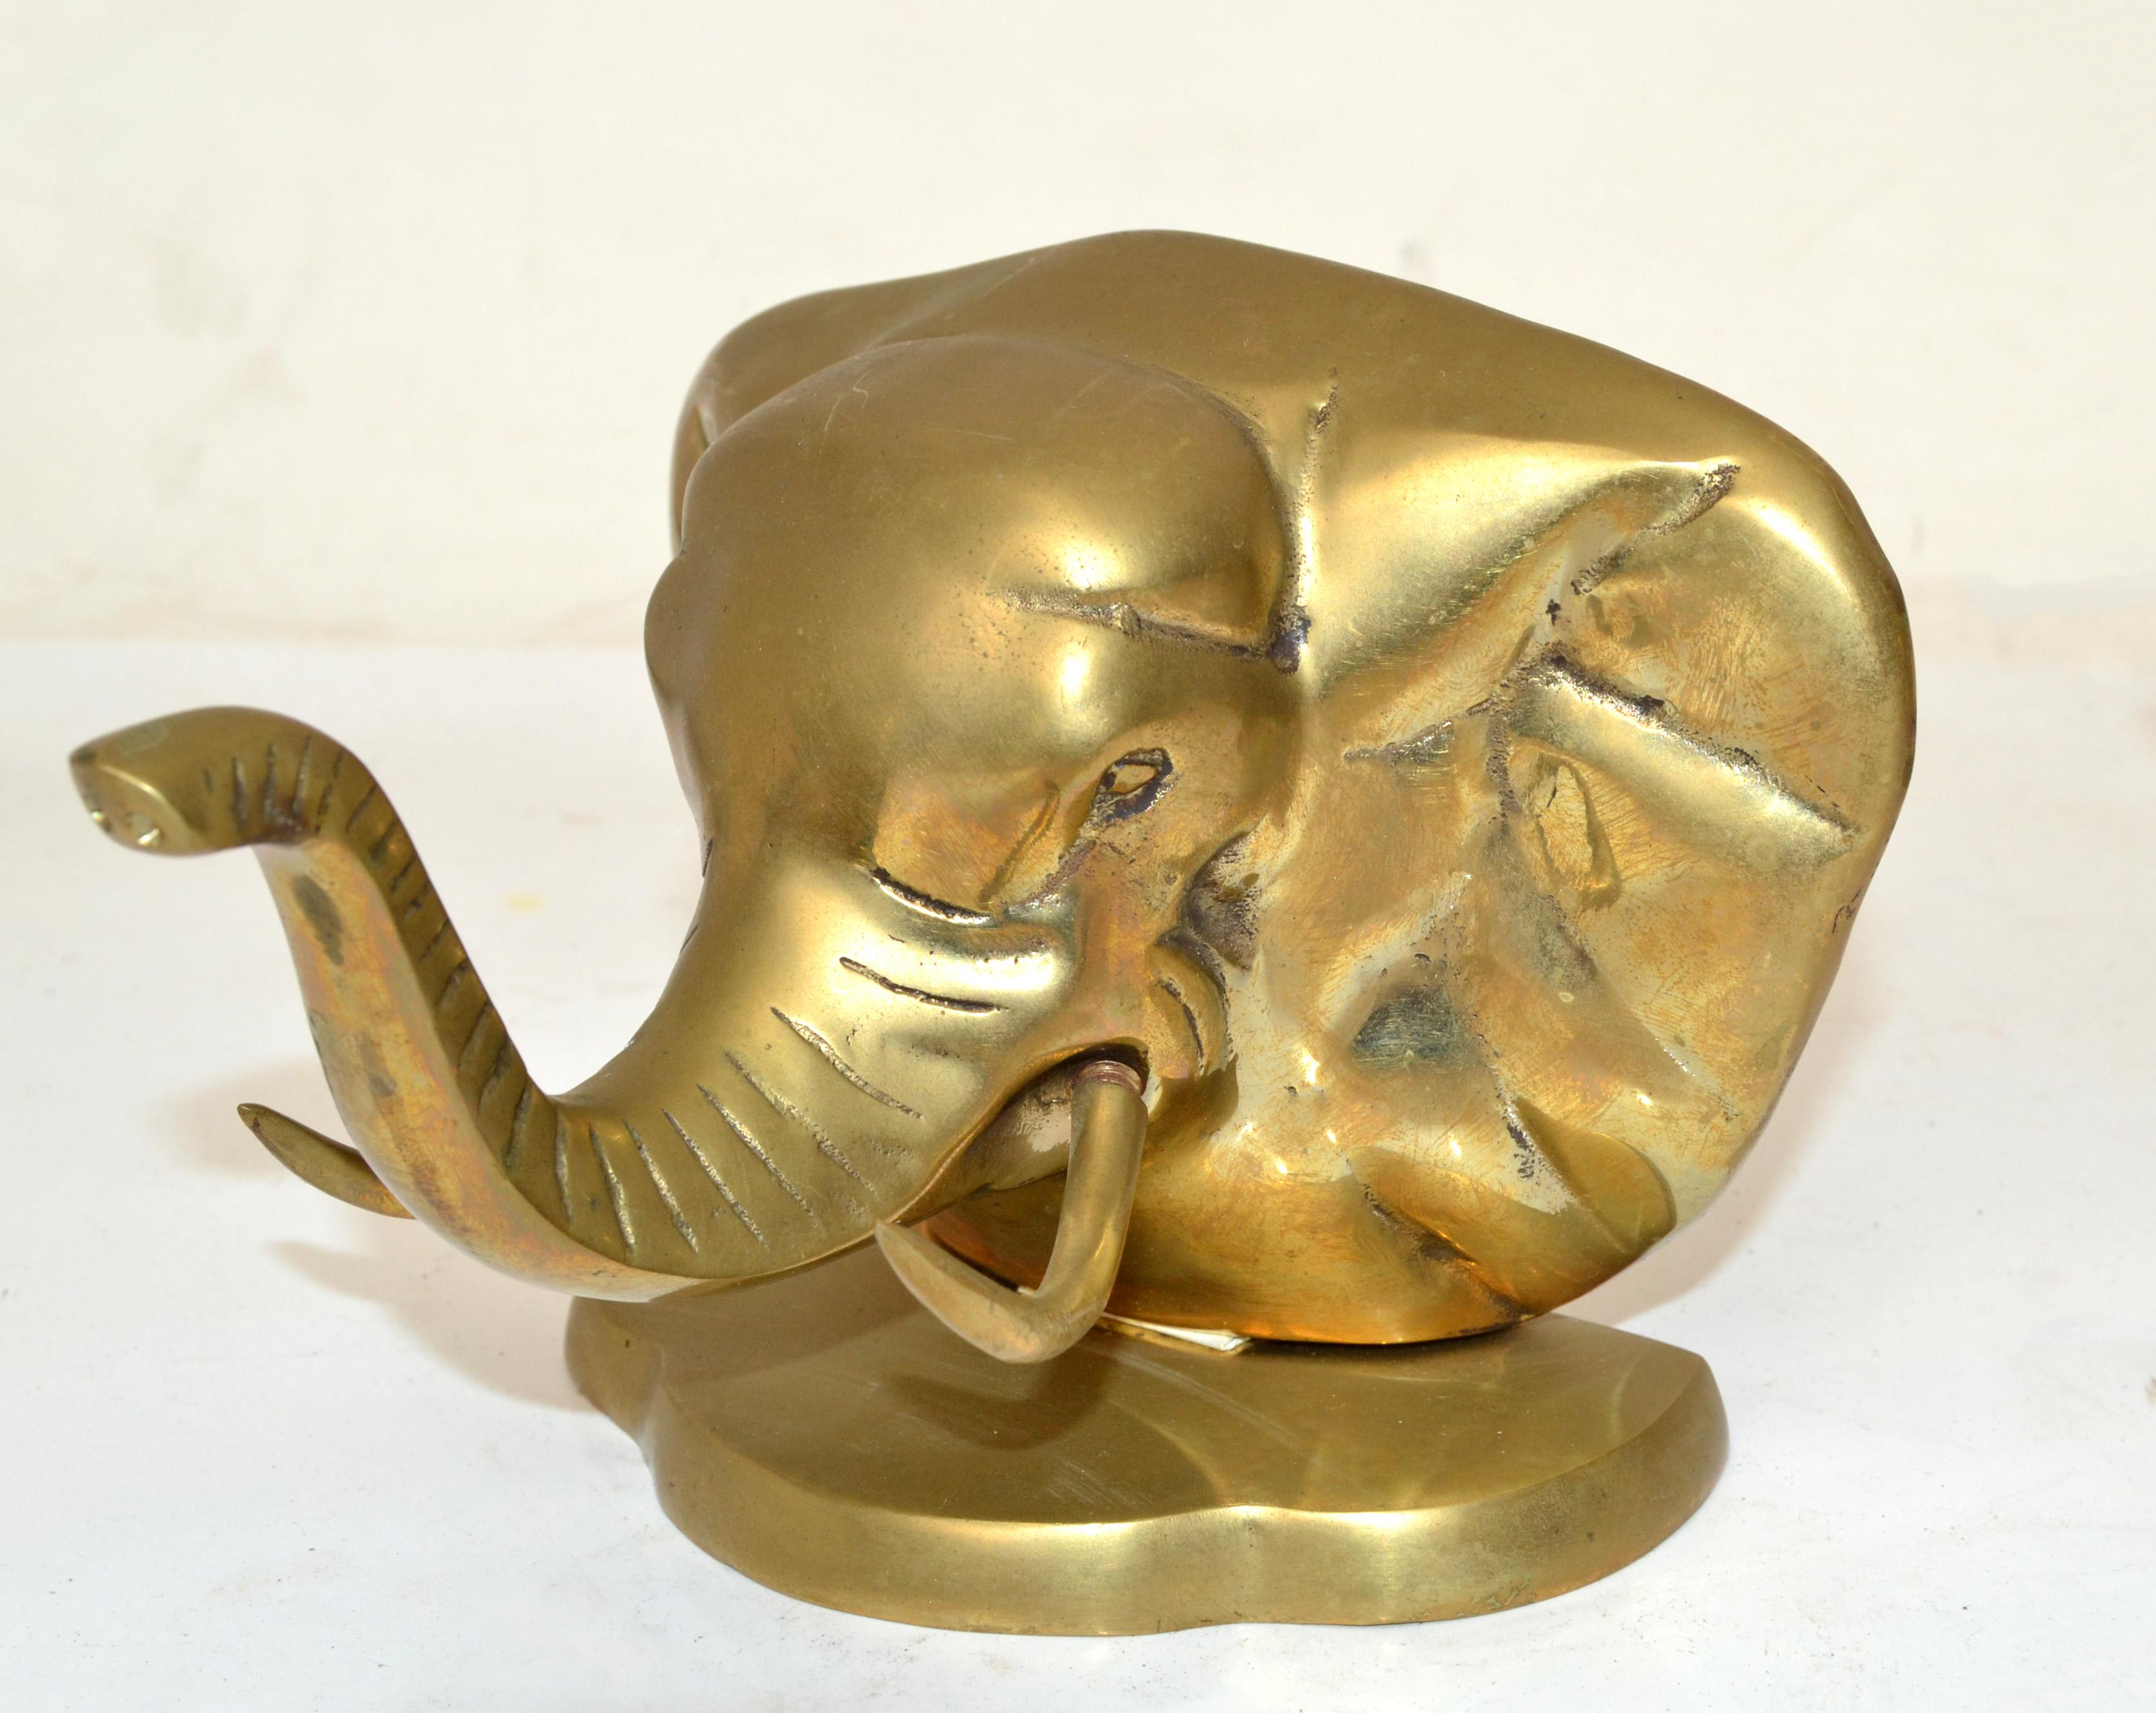 Korean Vintage Handcrafted Brass Elephant Head Bookends, Pair For Sale